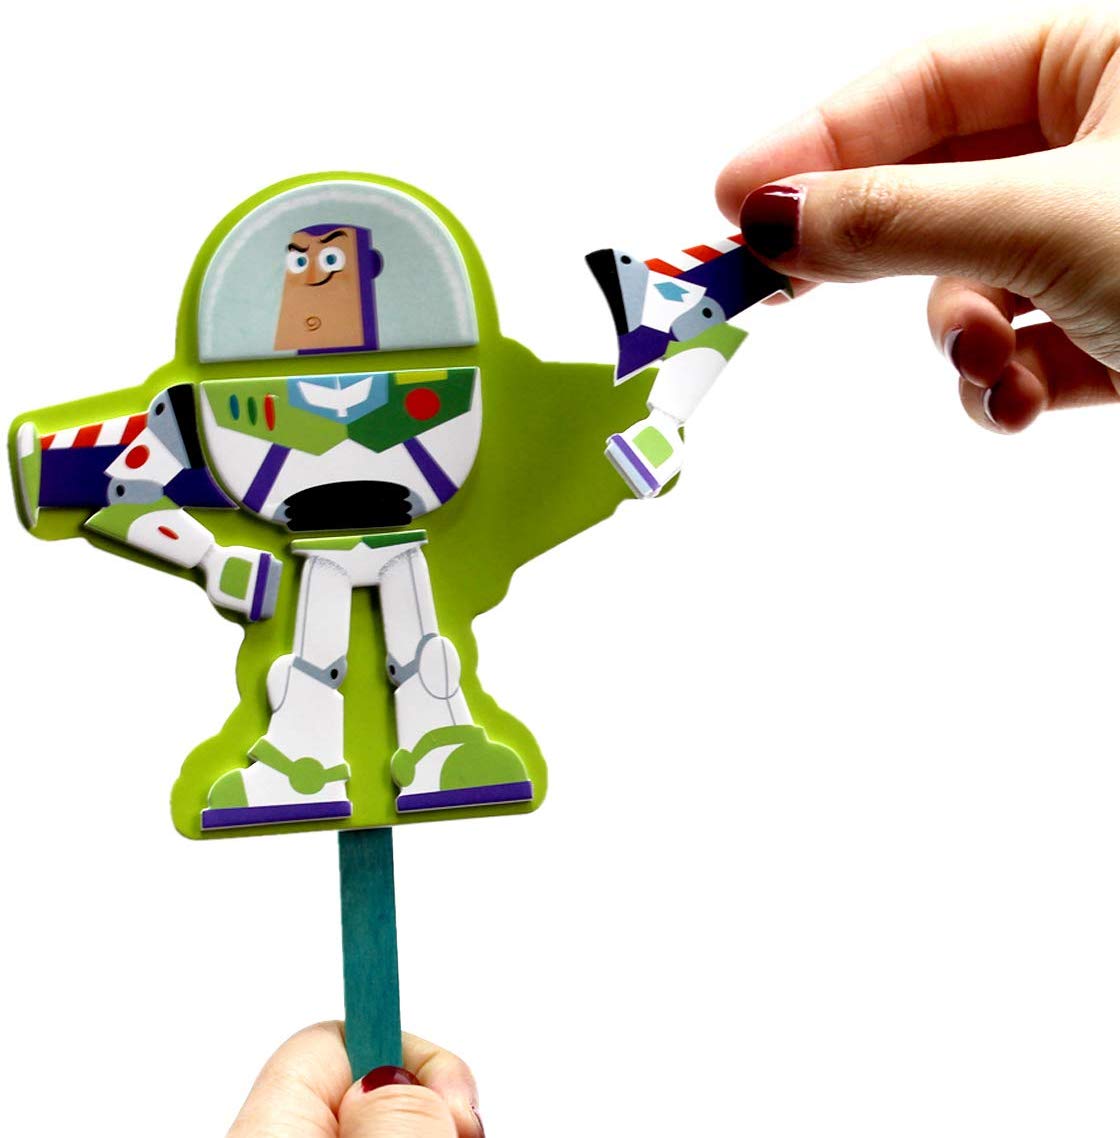 Toy Story 4 Craft Creativity Art Set: Make Your Own Forky and Other Characters, Gift for Kids, Ages 3+ - image 3 of 4